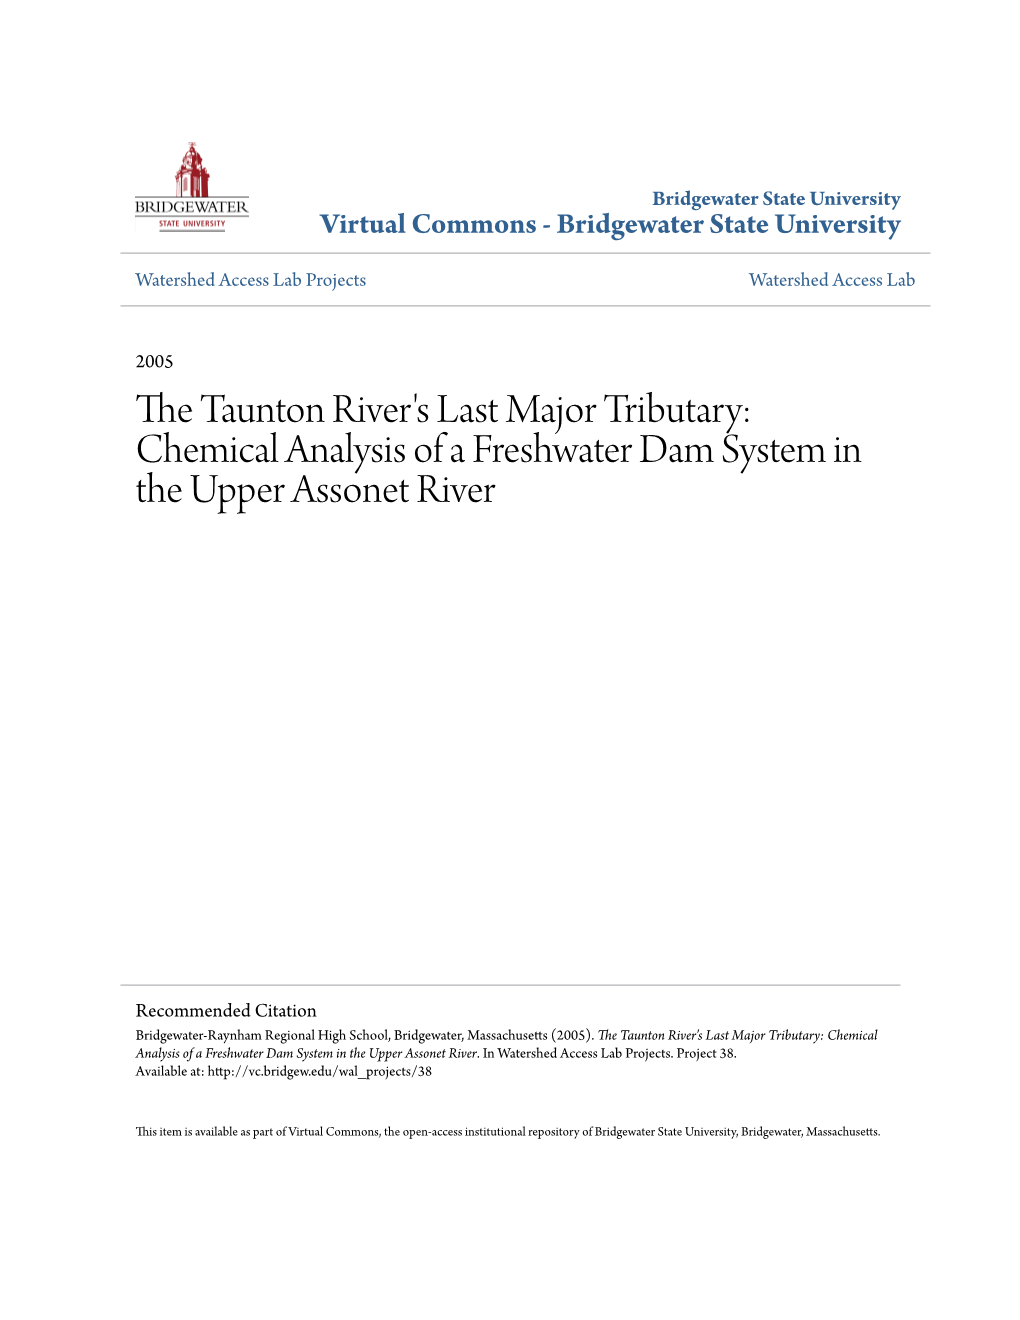 The Taunton River's Last Major Tributary: Chemical Analysis of a Freshwater Dam System in the Upper Assonet River